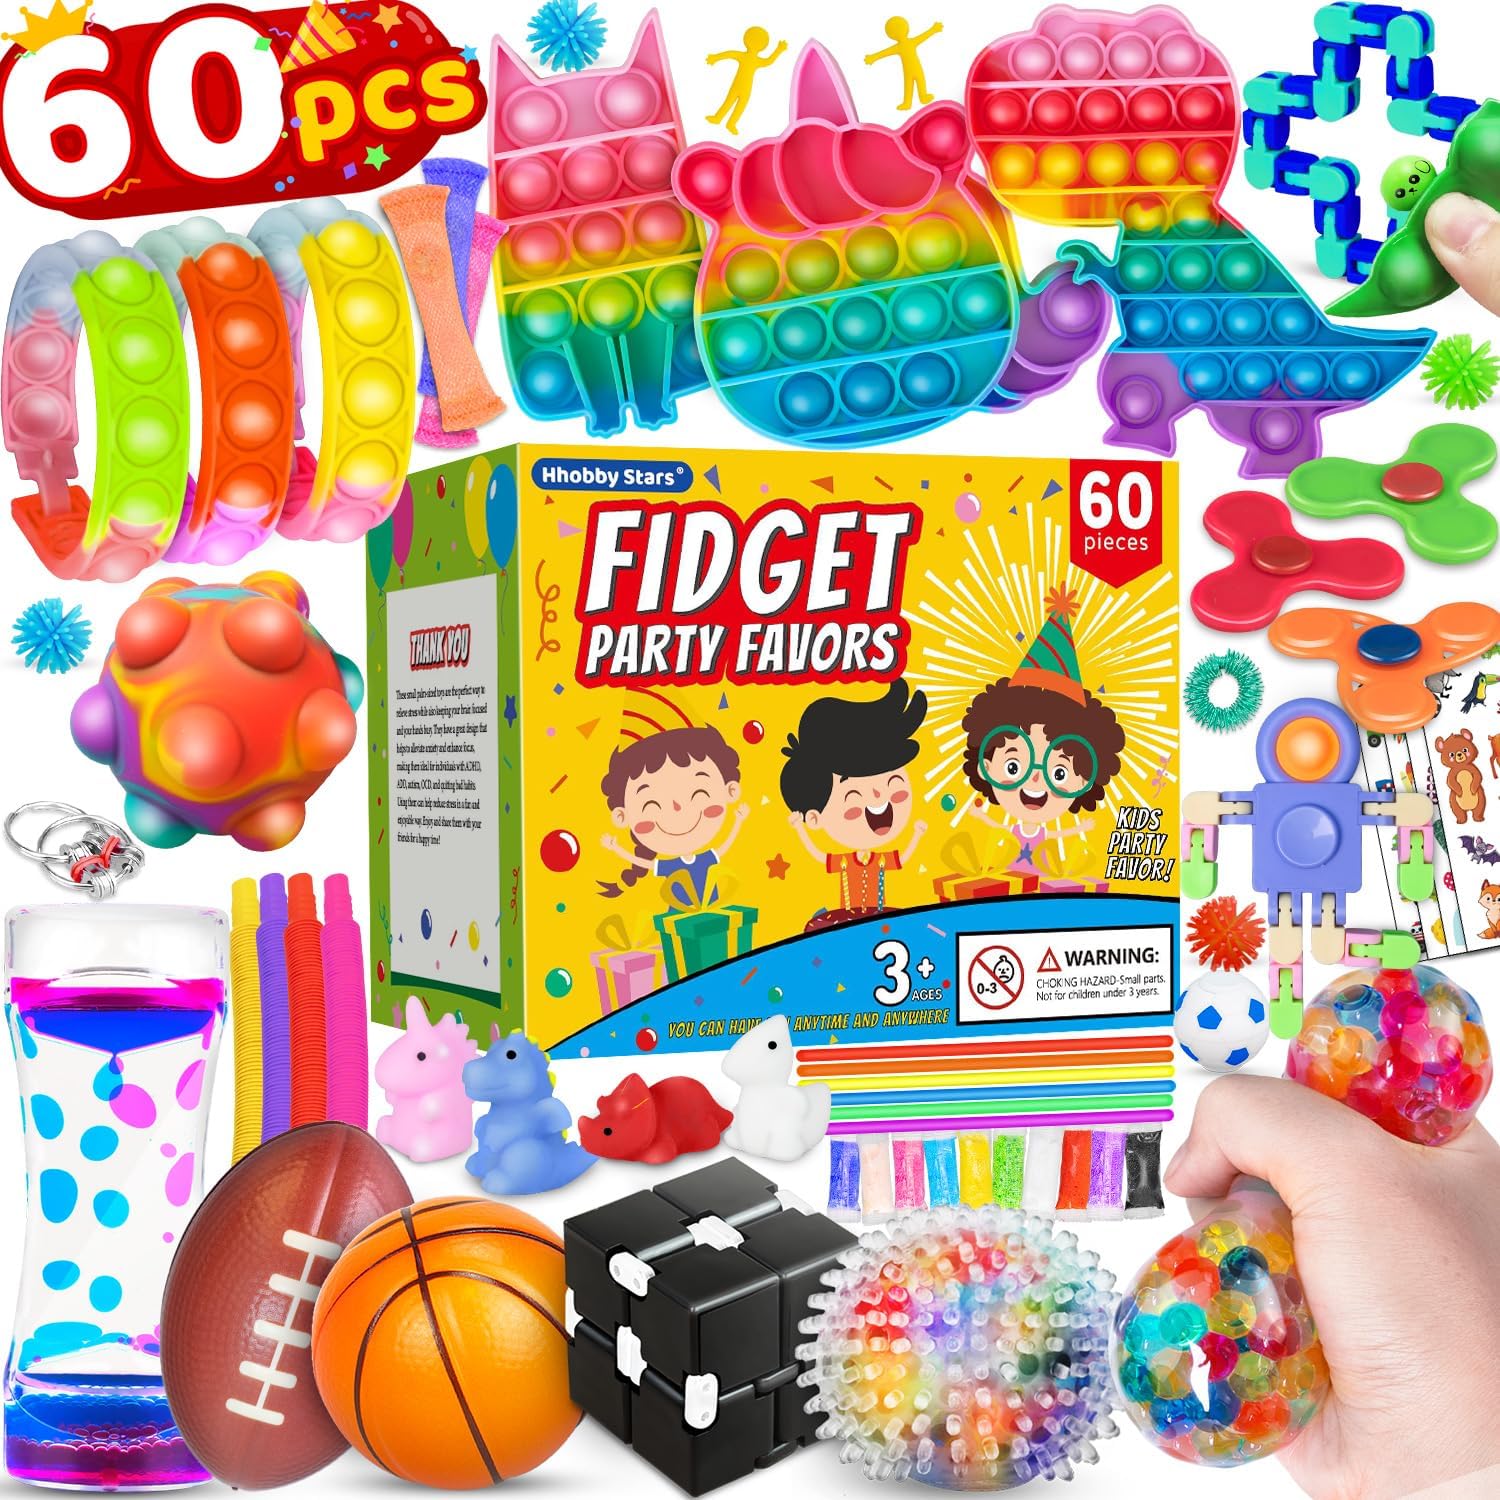 Mini Cube Goodie Bag Stuffers for Kids, Party Favors for Teens and Kids,  School, Classroom, and Birthday Party Rewards - 12 PCS